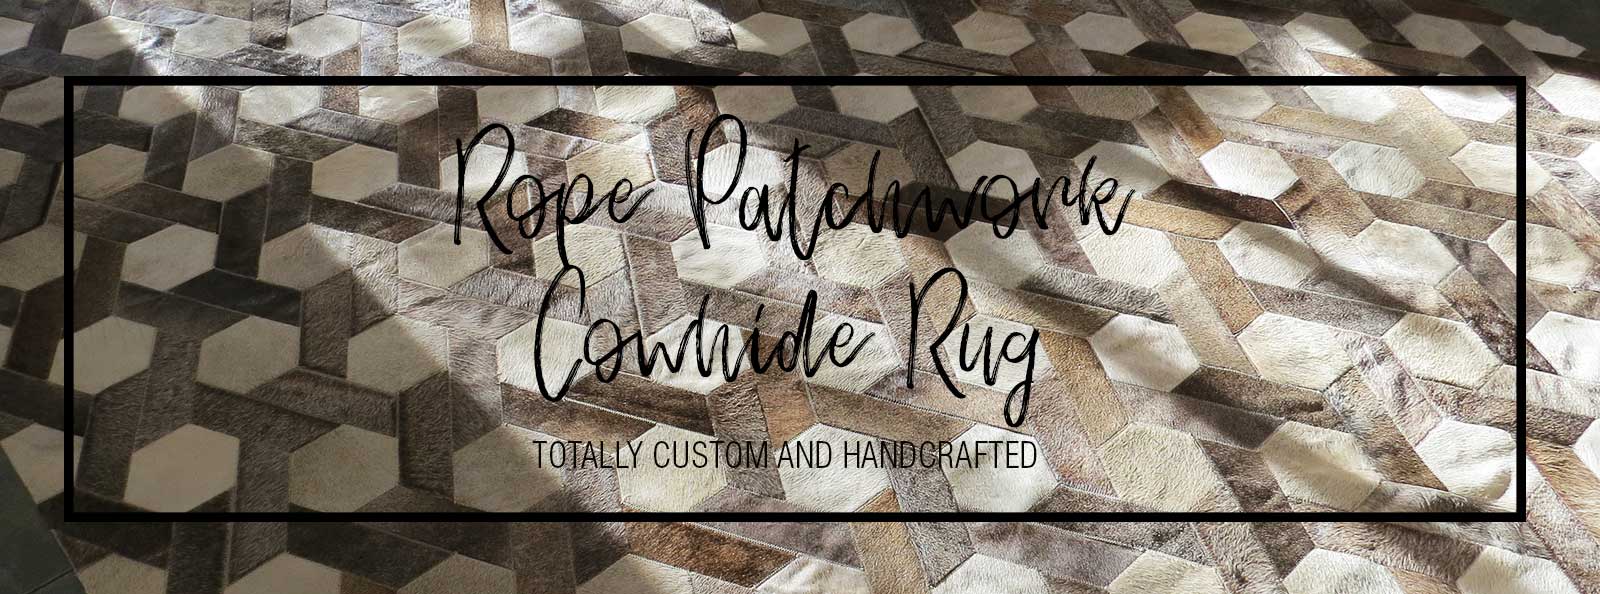 Custom Rope Patchwork Cowhide Rug in taupe and light gray